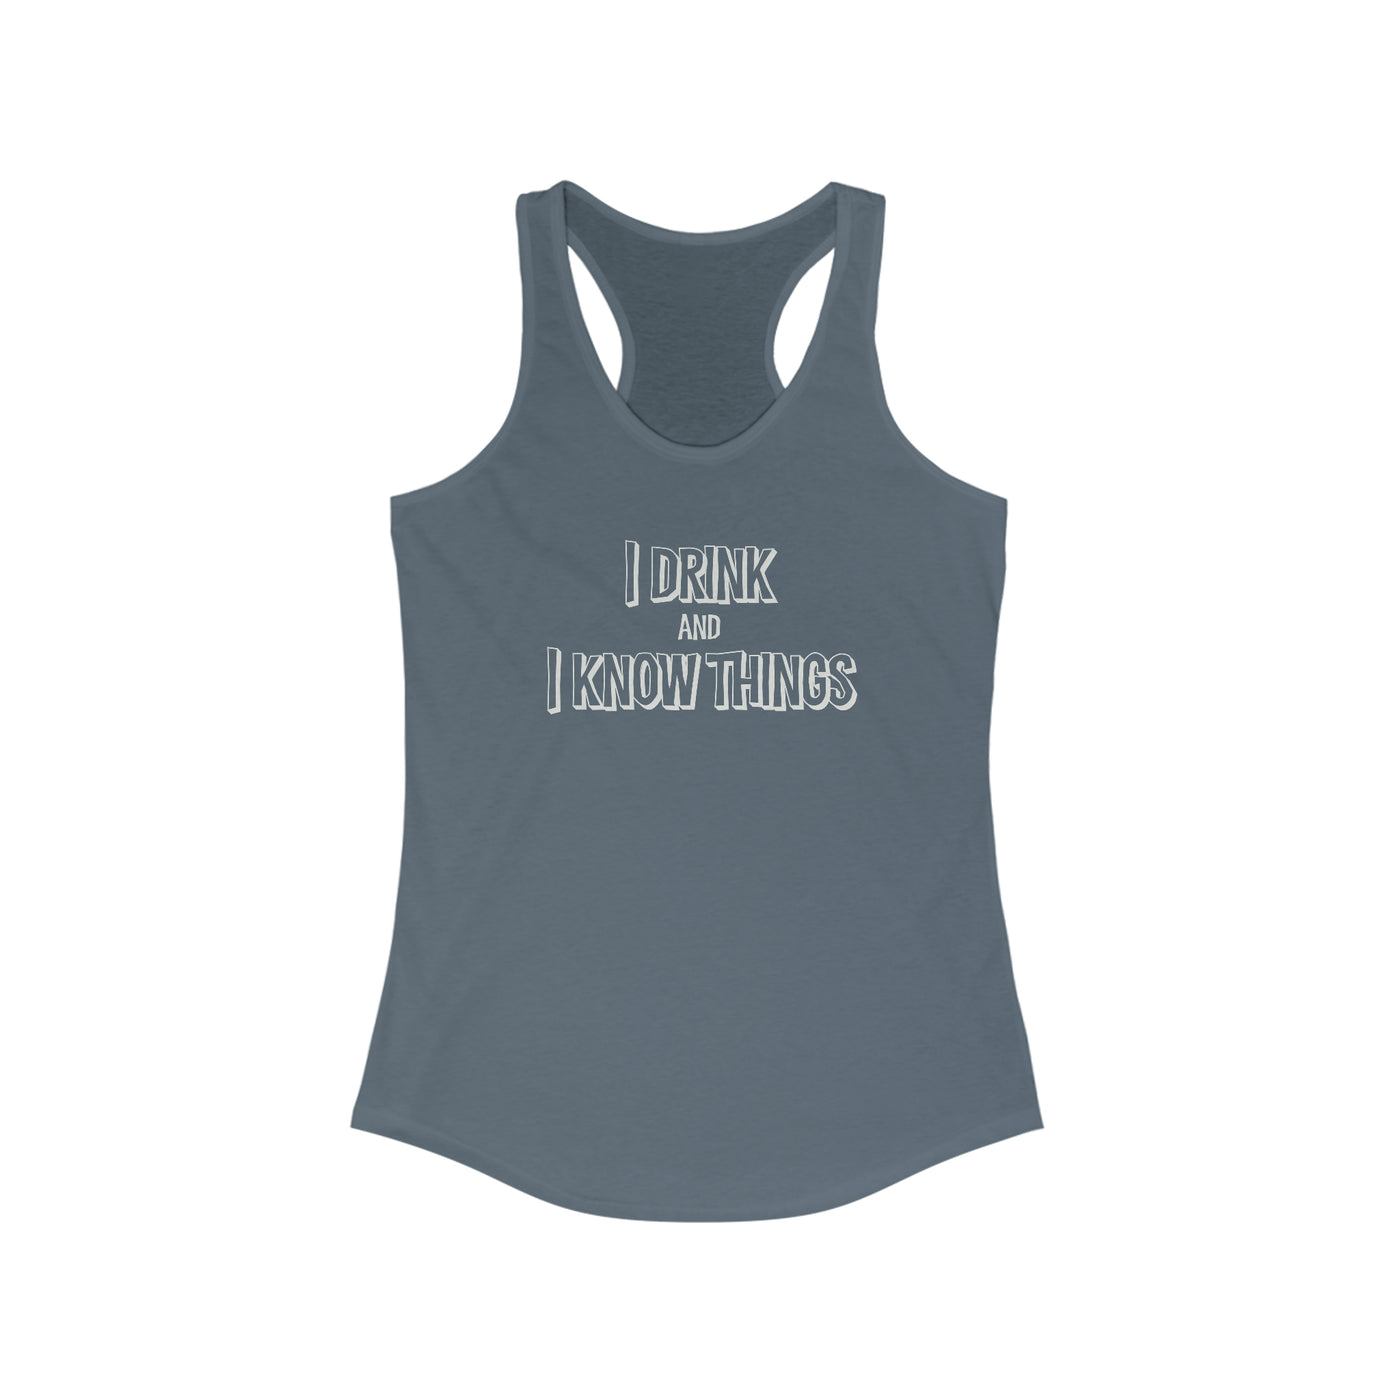 I Drink And I Know Things Women's Racerback Tank